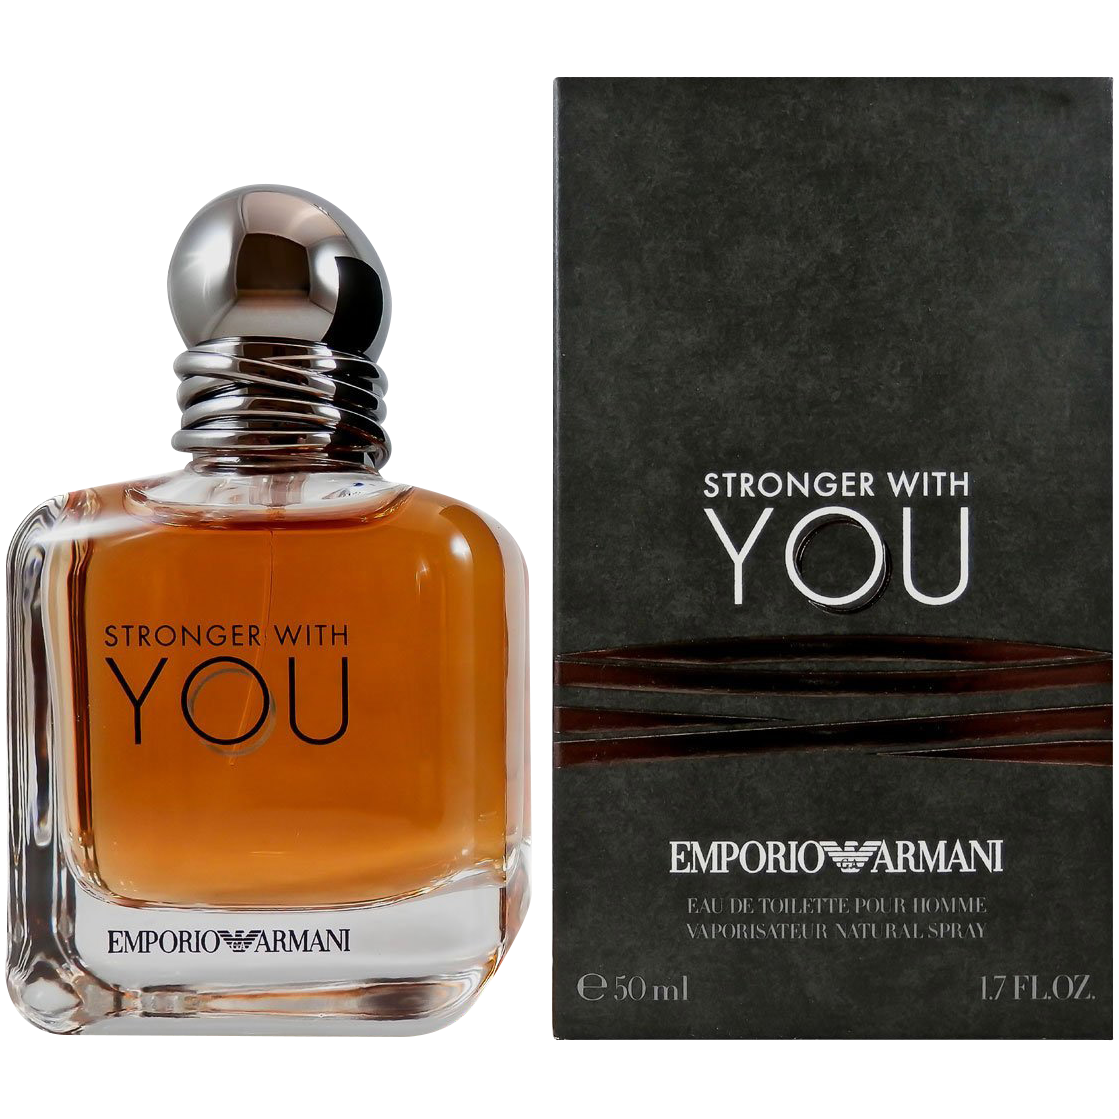 Stronger with you only. Emporio Armani stronger with you 100ml. Эмпорио Армани стронгер with you. Туалетная вода Emporio Armani stronger with you. Мужской Emporio Armani stronger with you, 100 мл.